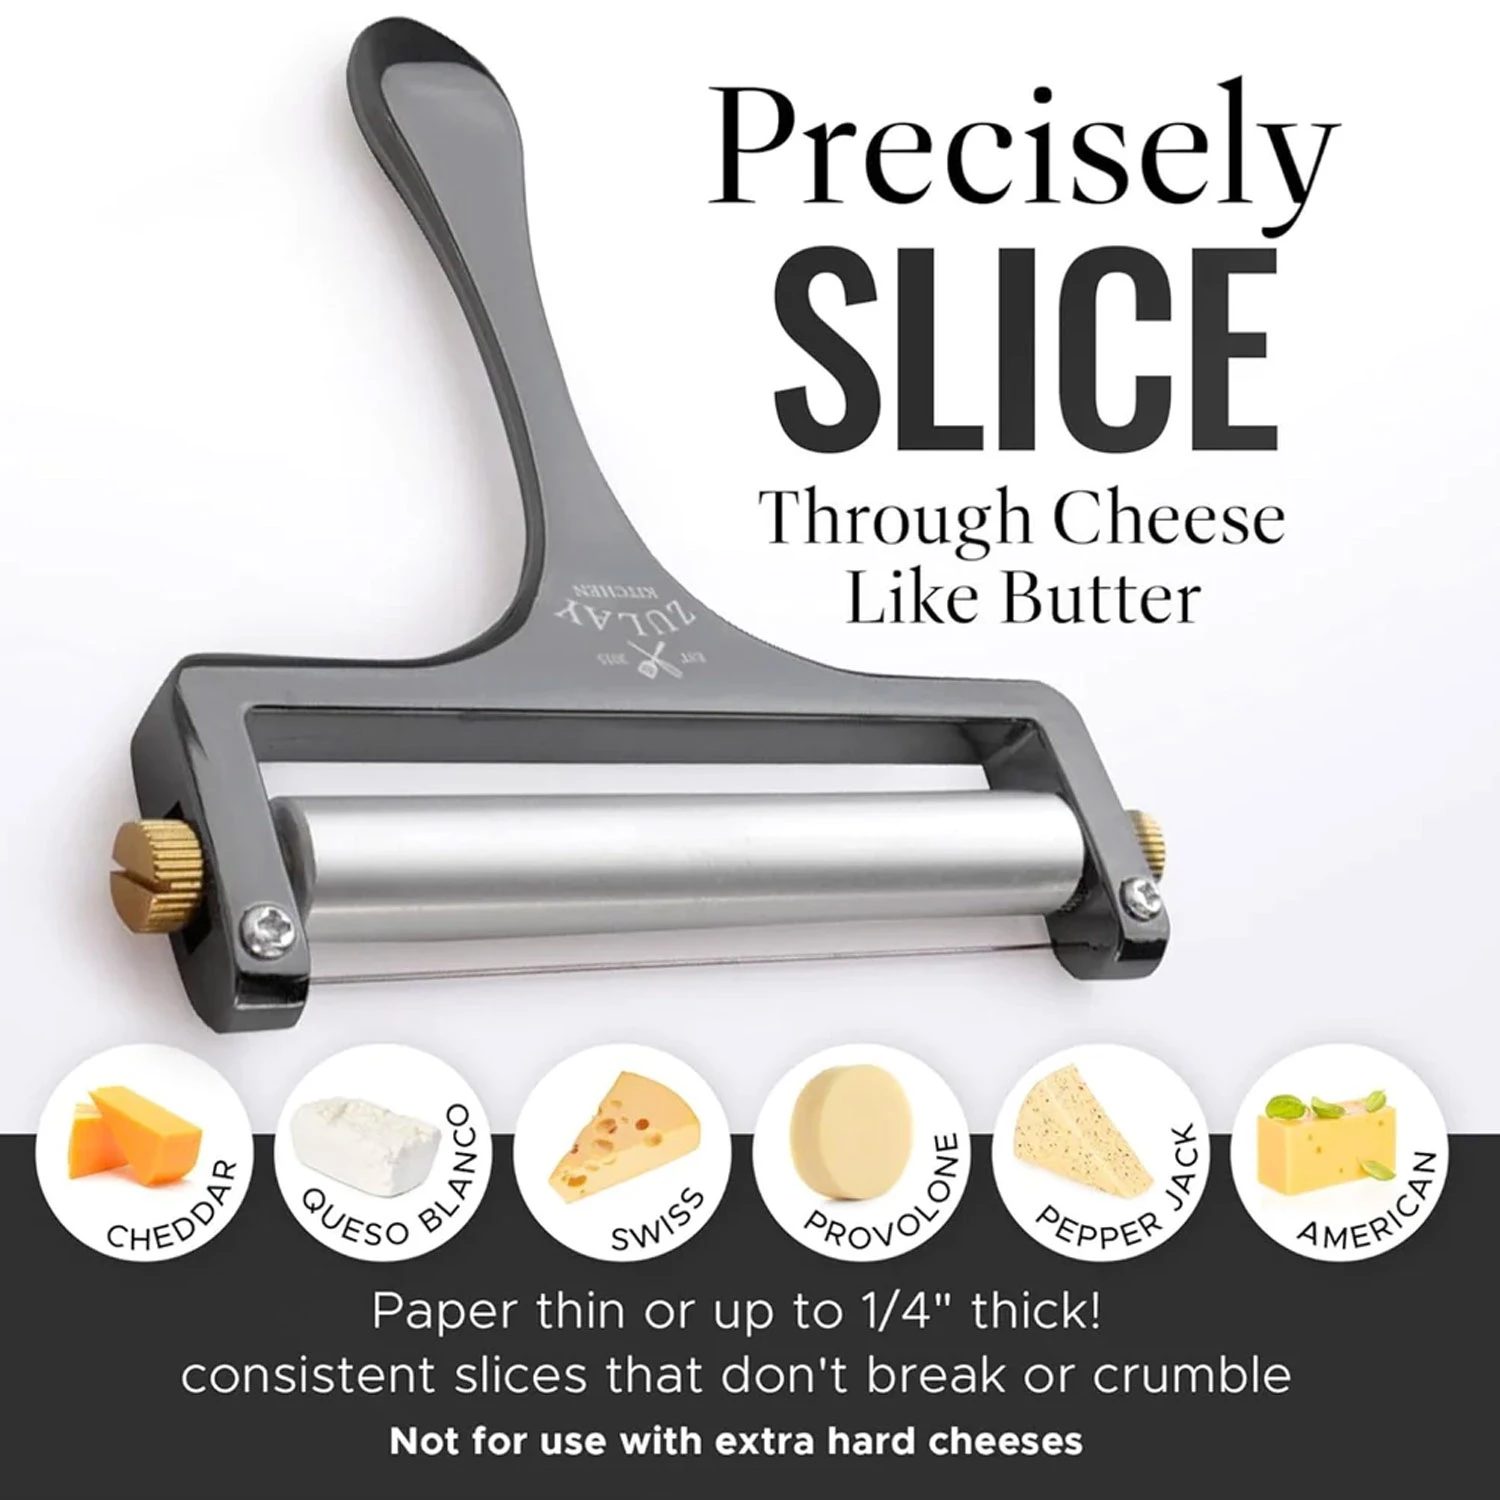 Wire Cheese Slicer With Adjustable Thickness For Soft & Semi-Hard Cheeses - 2 Extra Wires Included